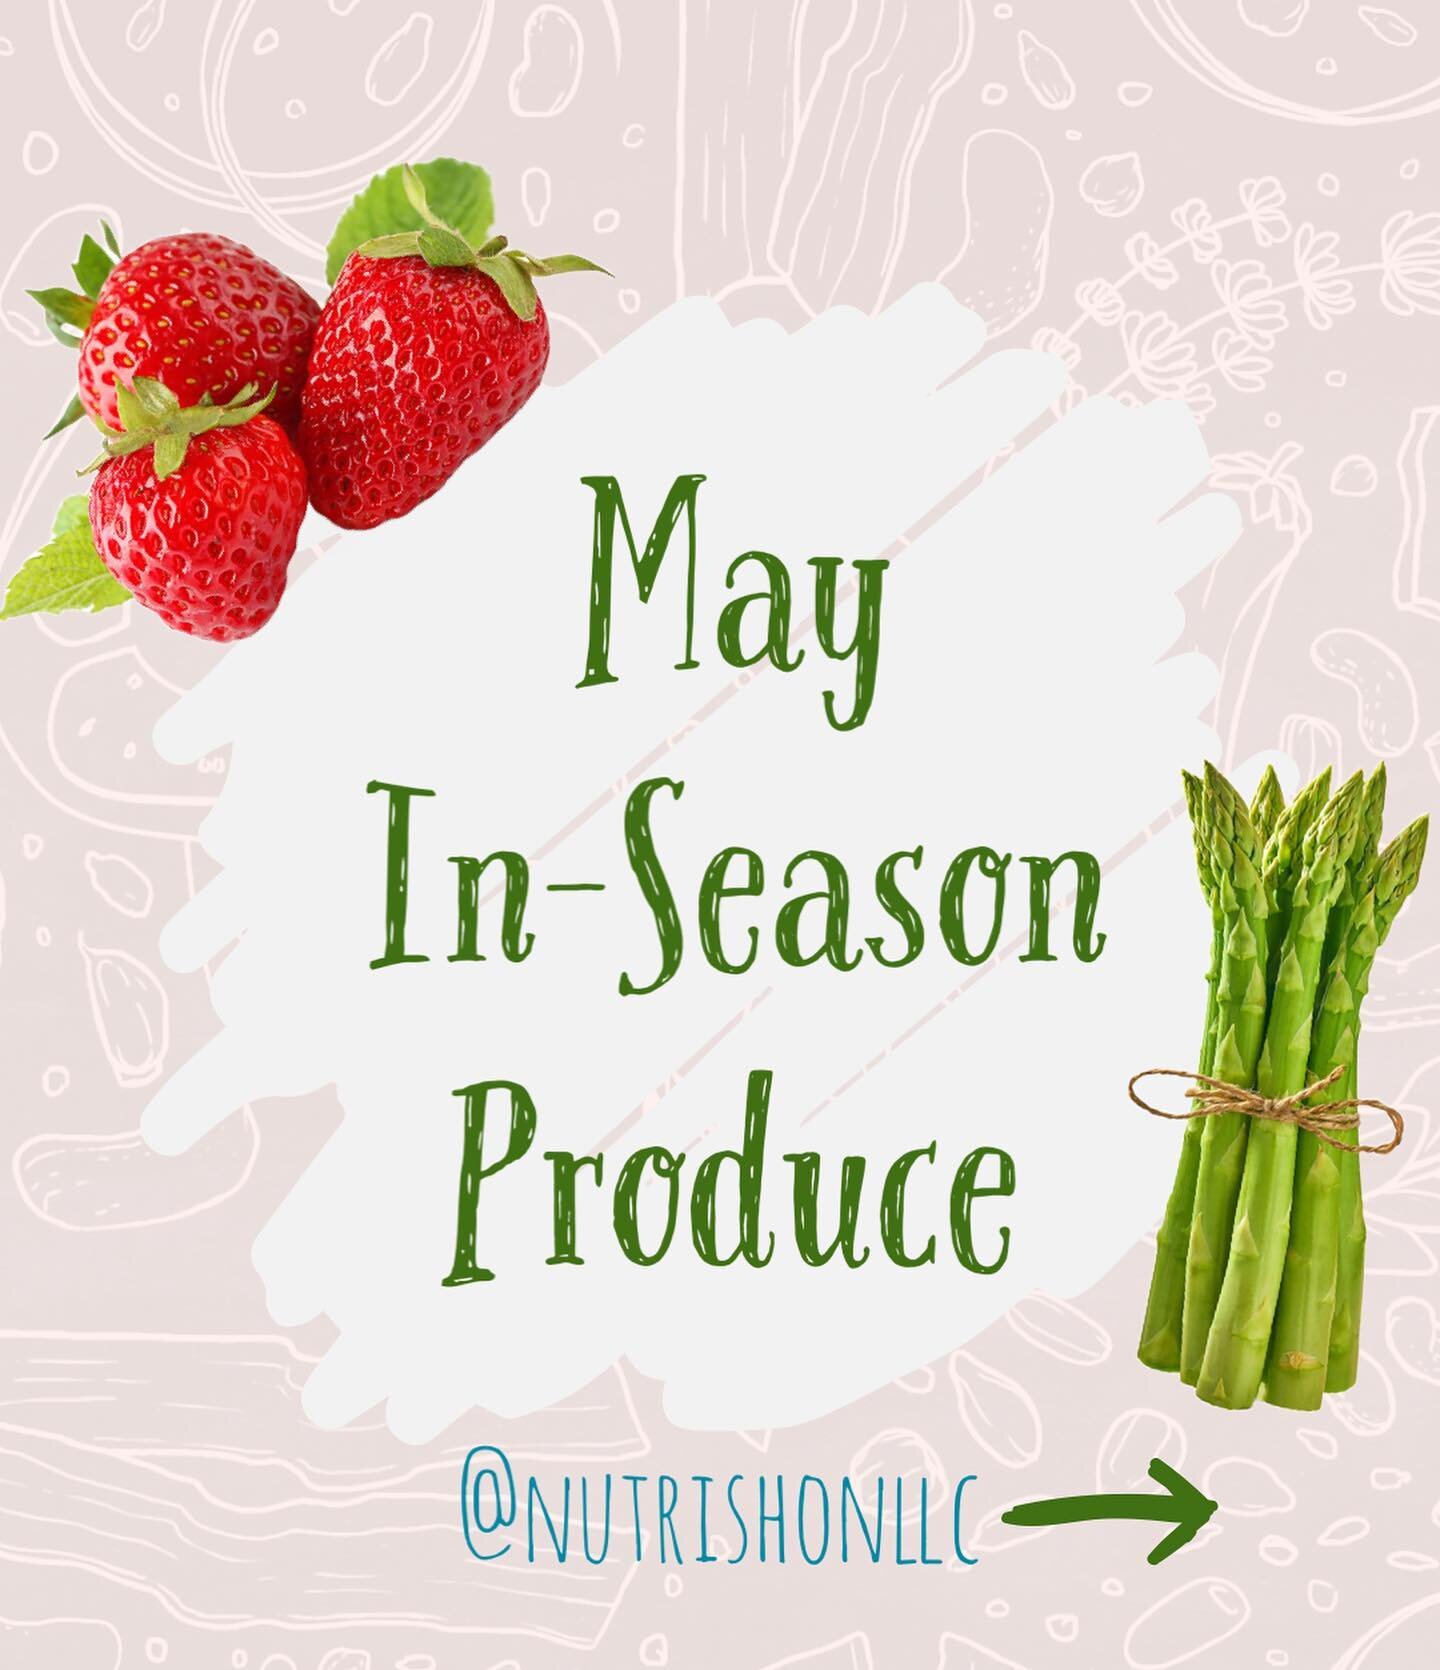 April showers bring May flowers&hellip;and produce!
May has a wide variety of fruits and vegetables to offer. 

This is the season for pastas Primavera and rhubarb pies! 

Get out there and give this fresh variety of crops a try!
-

For personalized 